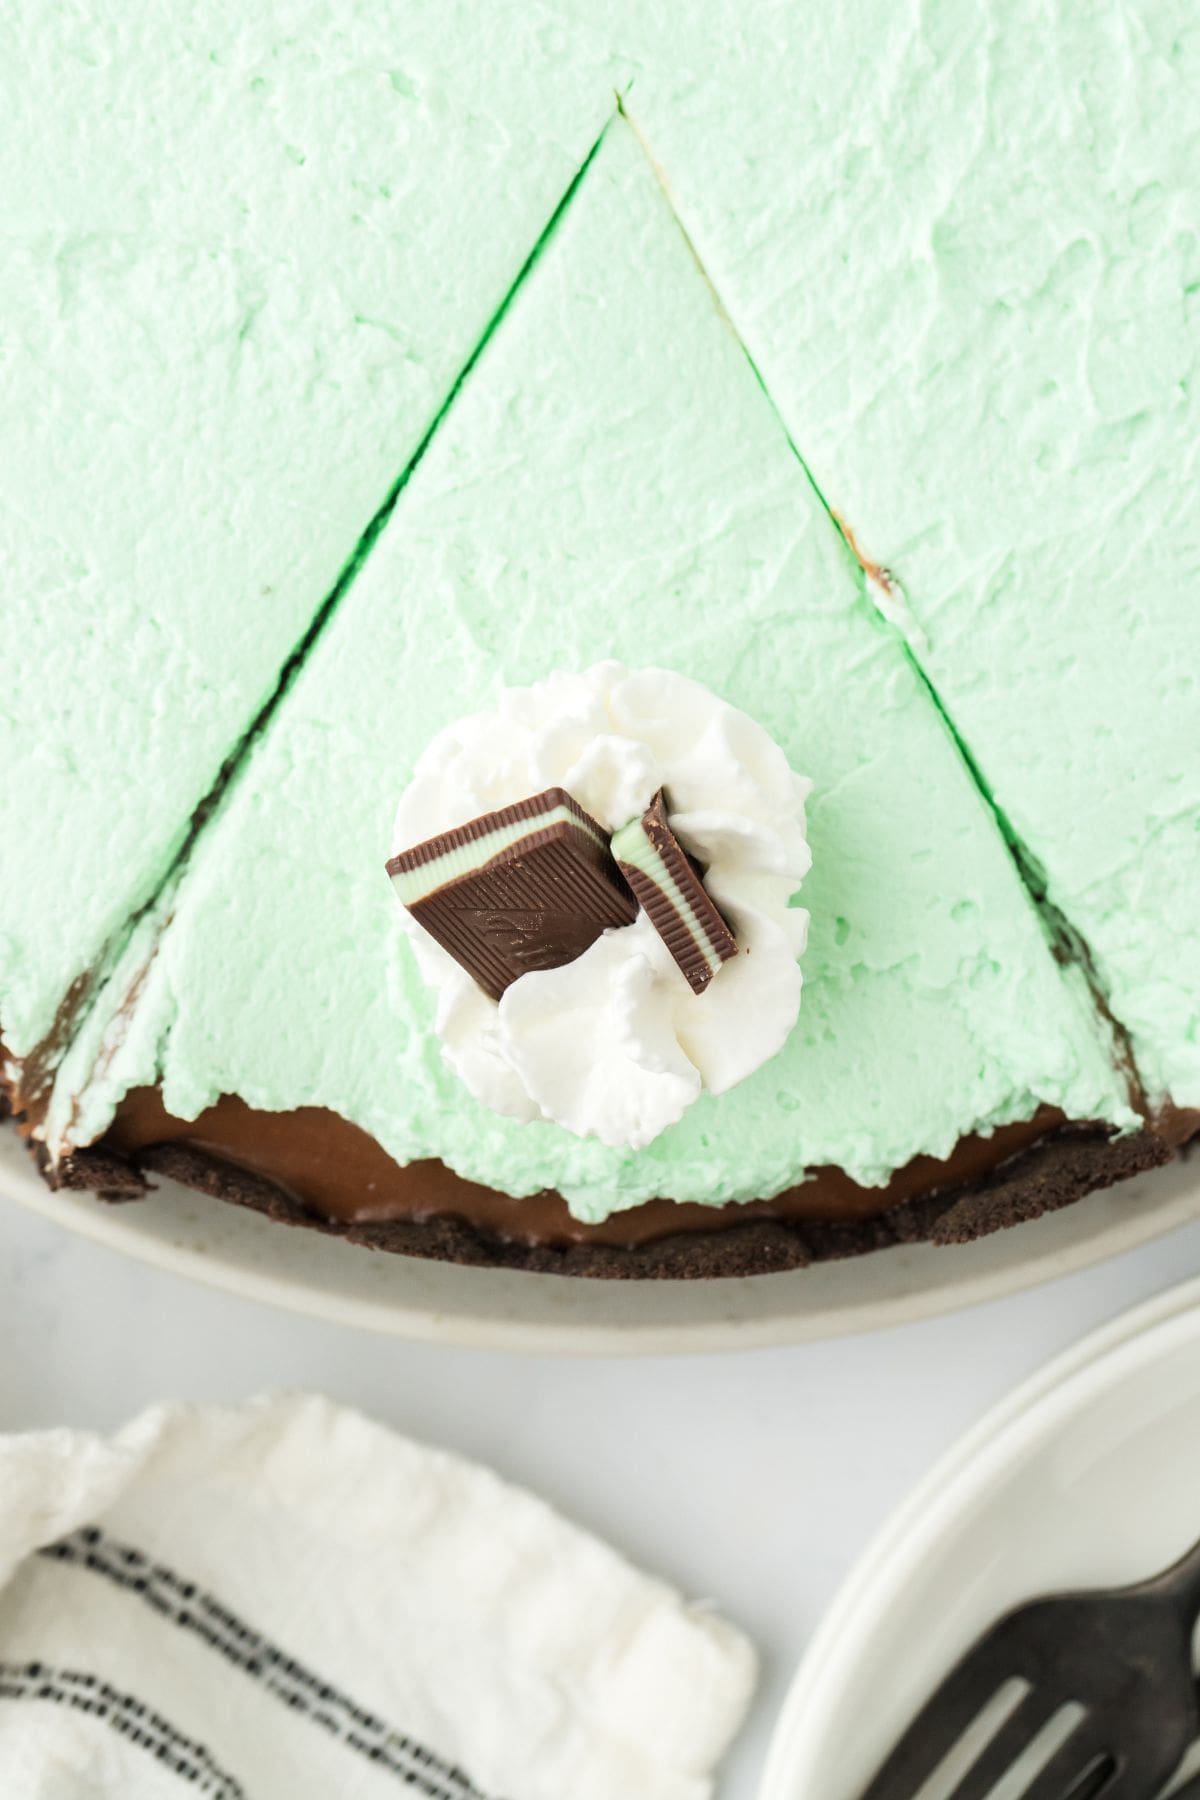 Mint chocolate cream pie with a slice cut and topped with whipped cream and mint candy.